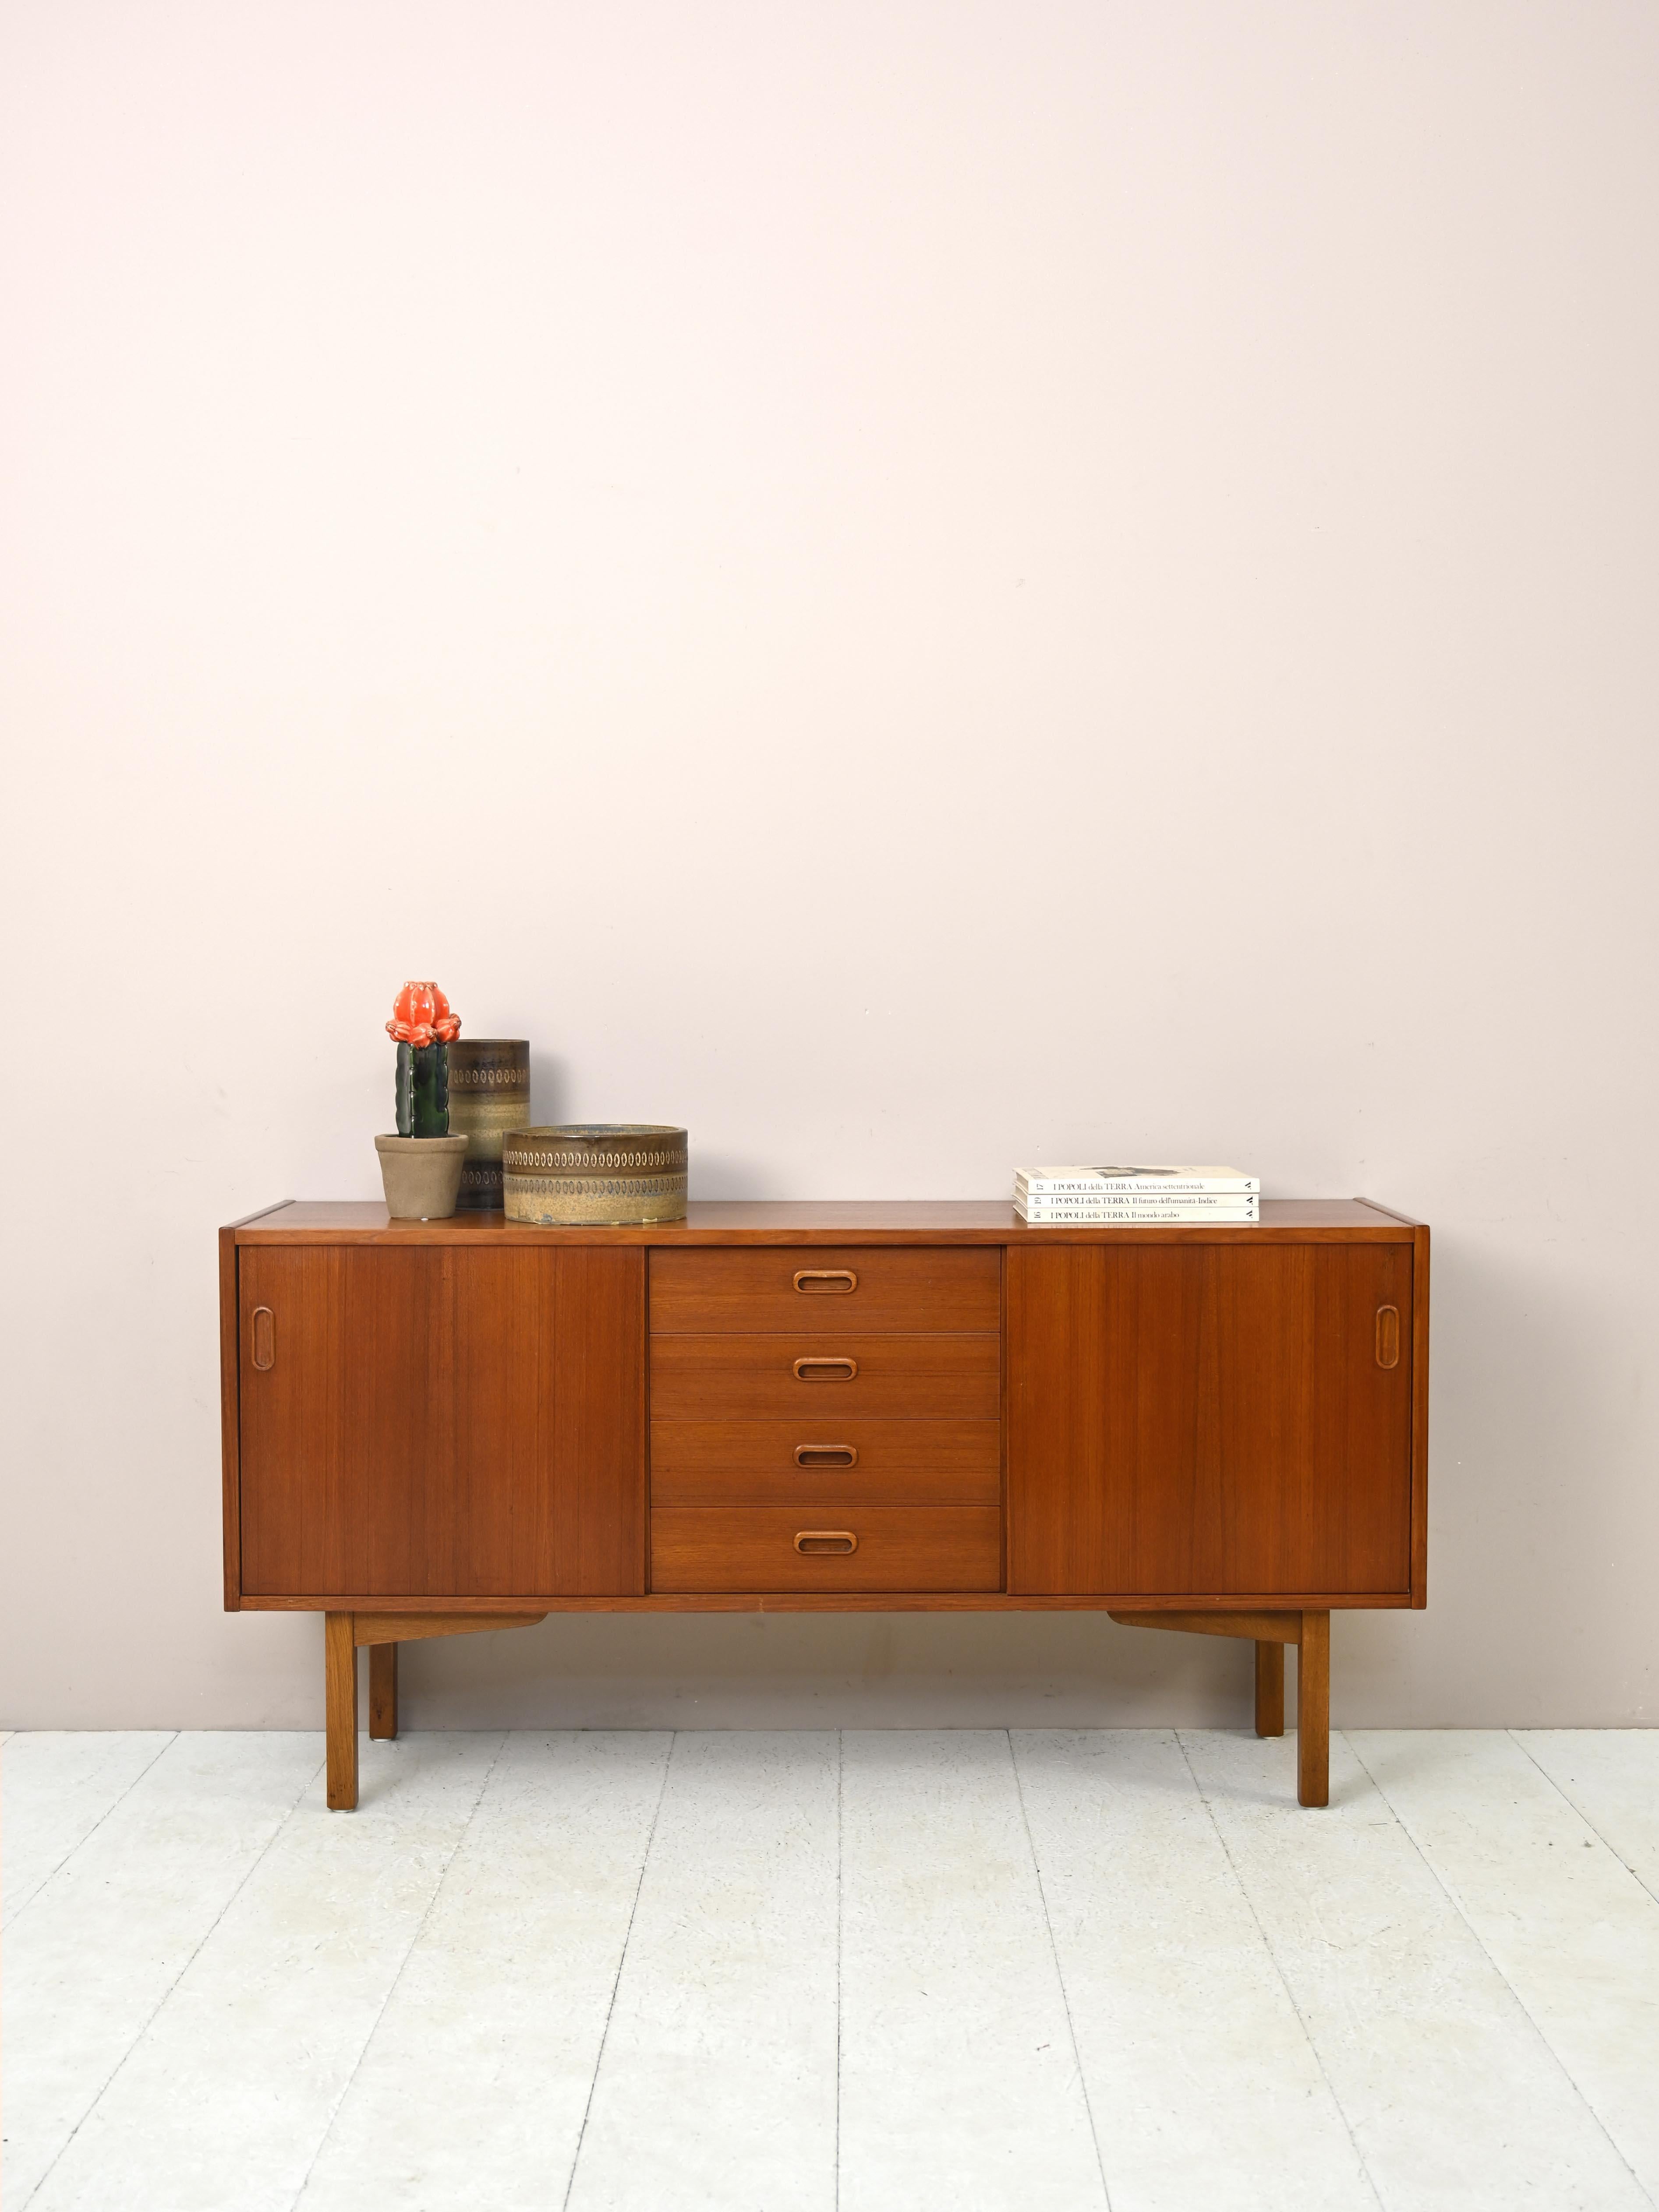 Scandinavian modernist sideboard.

A piece of furniture with a Classic and elegant style, it features 4 central drawers and two sliding doors on the sides.
The carved wooden handle and squared legs give it a modern look, suitable for embellishing